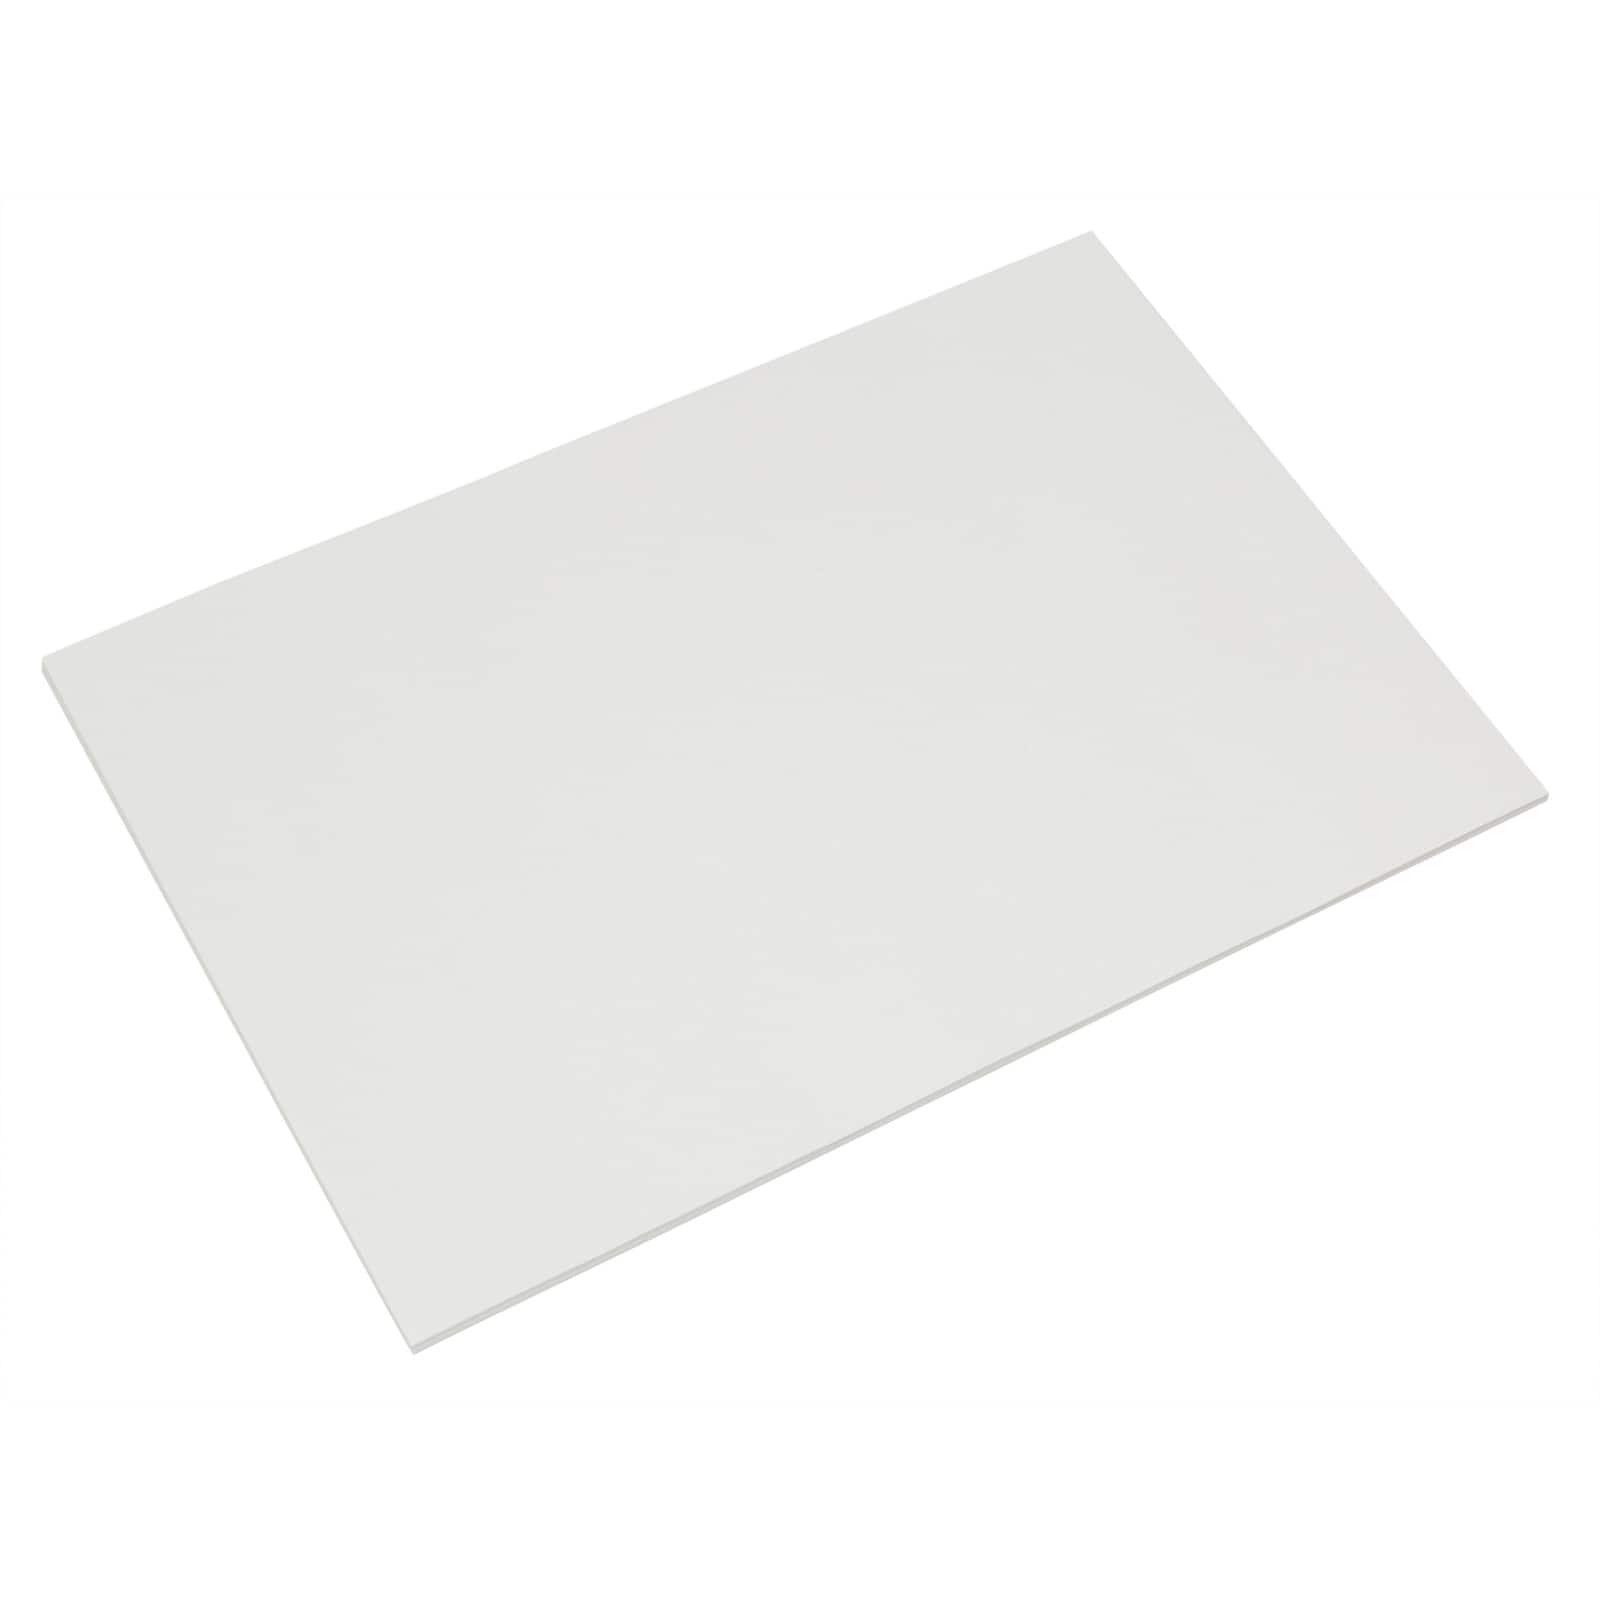 50 Sheets B5 Loose-leaf Thick Sketch Drawing Paper Painting Art Replacement Paper Supplies for Artist School, Size: 24.6×17.4cm, White